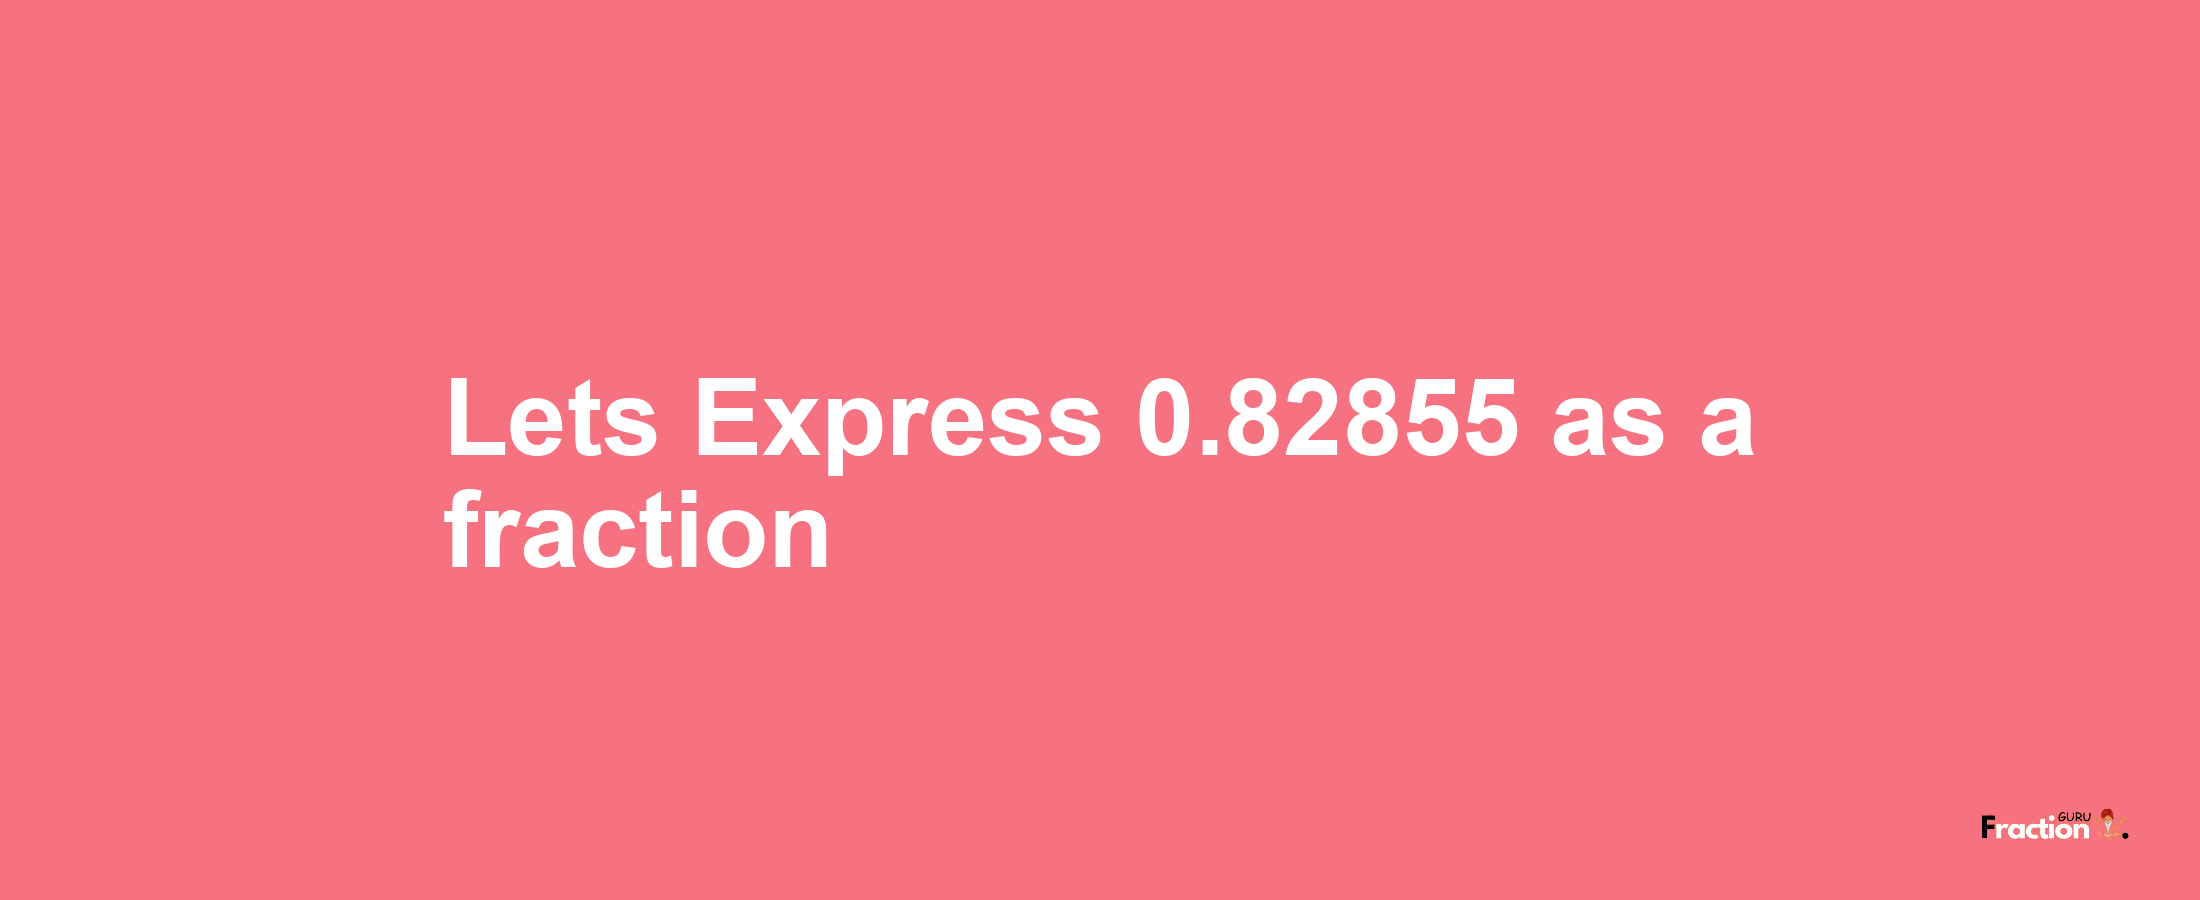 Lets Express 0.82855 as afraction